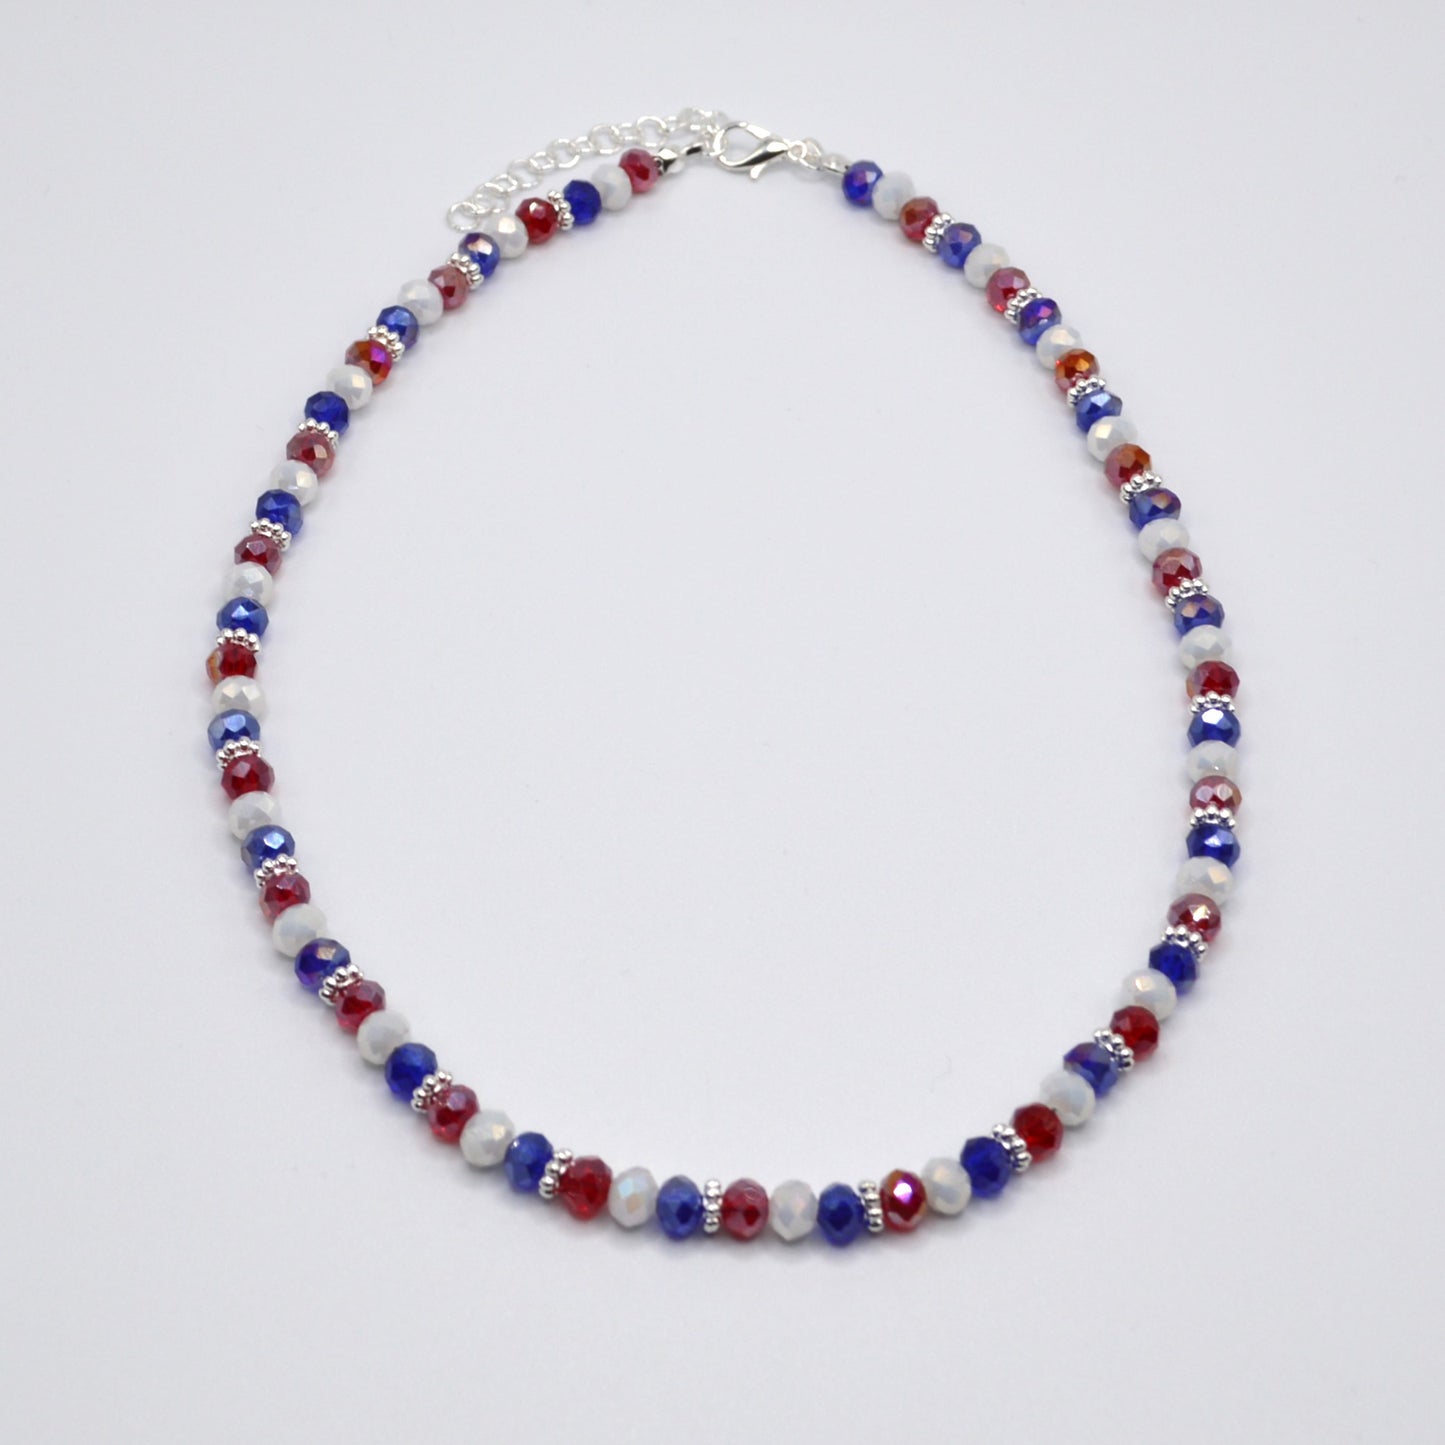 Red, White, and Blue Crystal Necklace